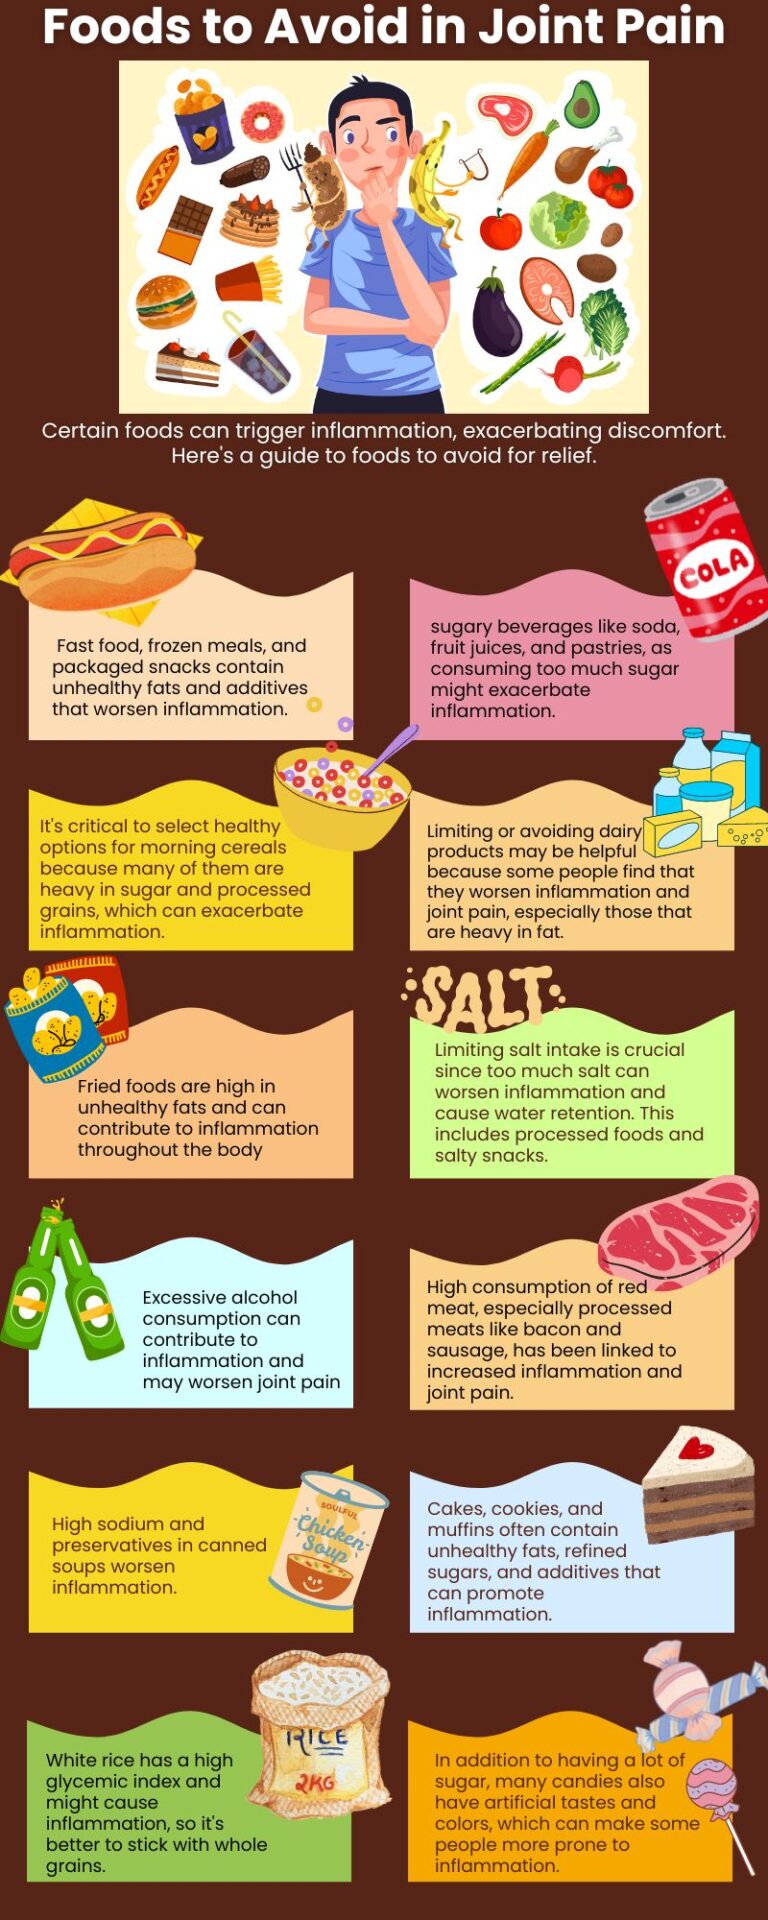 what not to eat when having knee pain an illustration of the food items